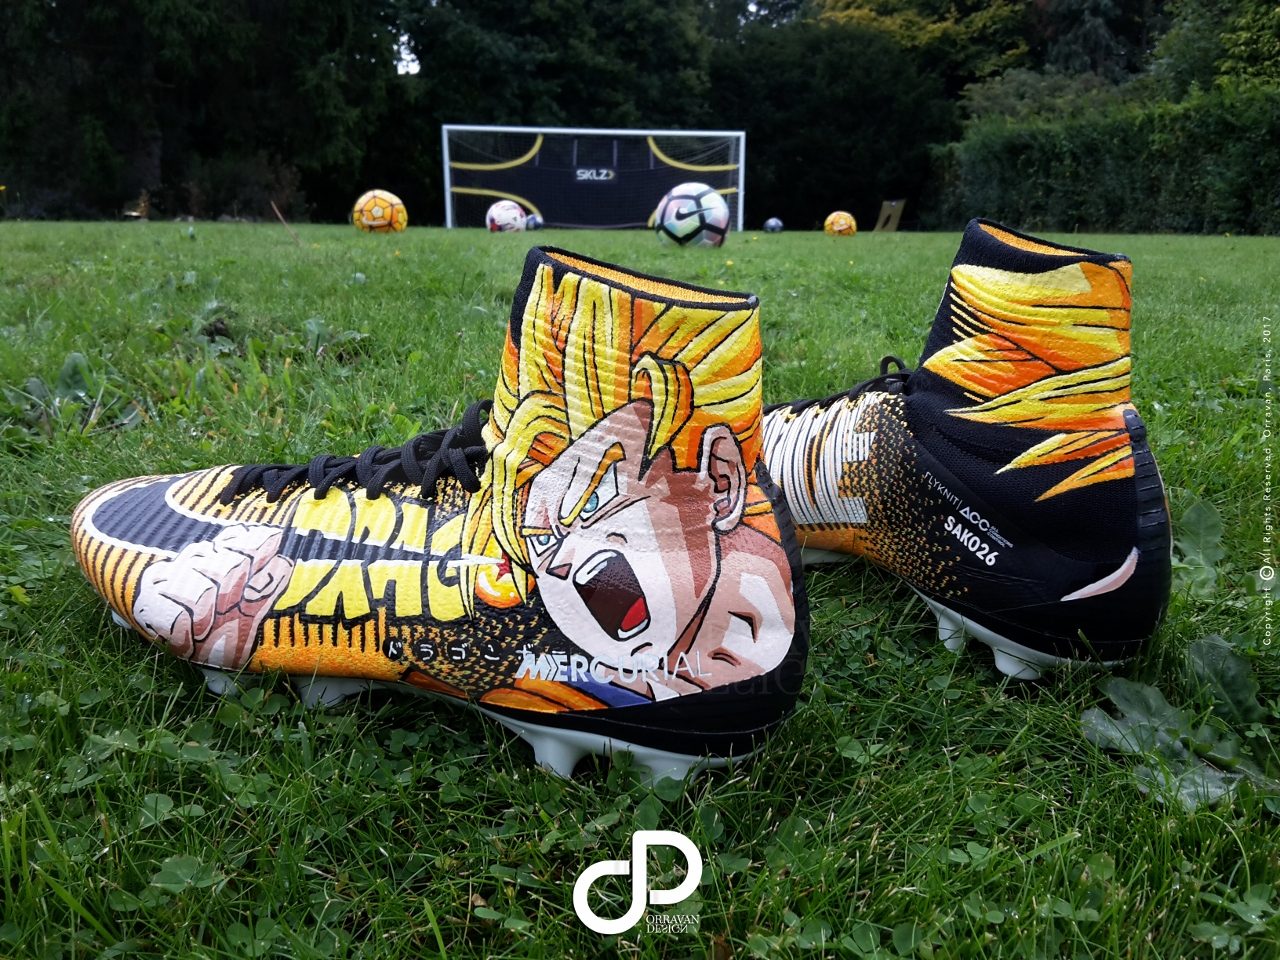 dragon ball z soccer cleats for sale